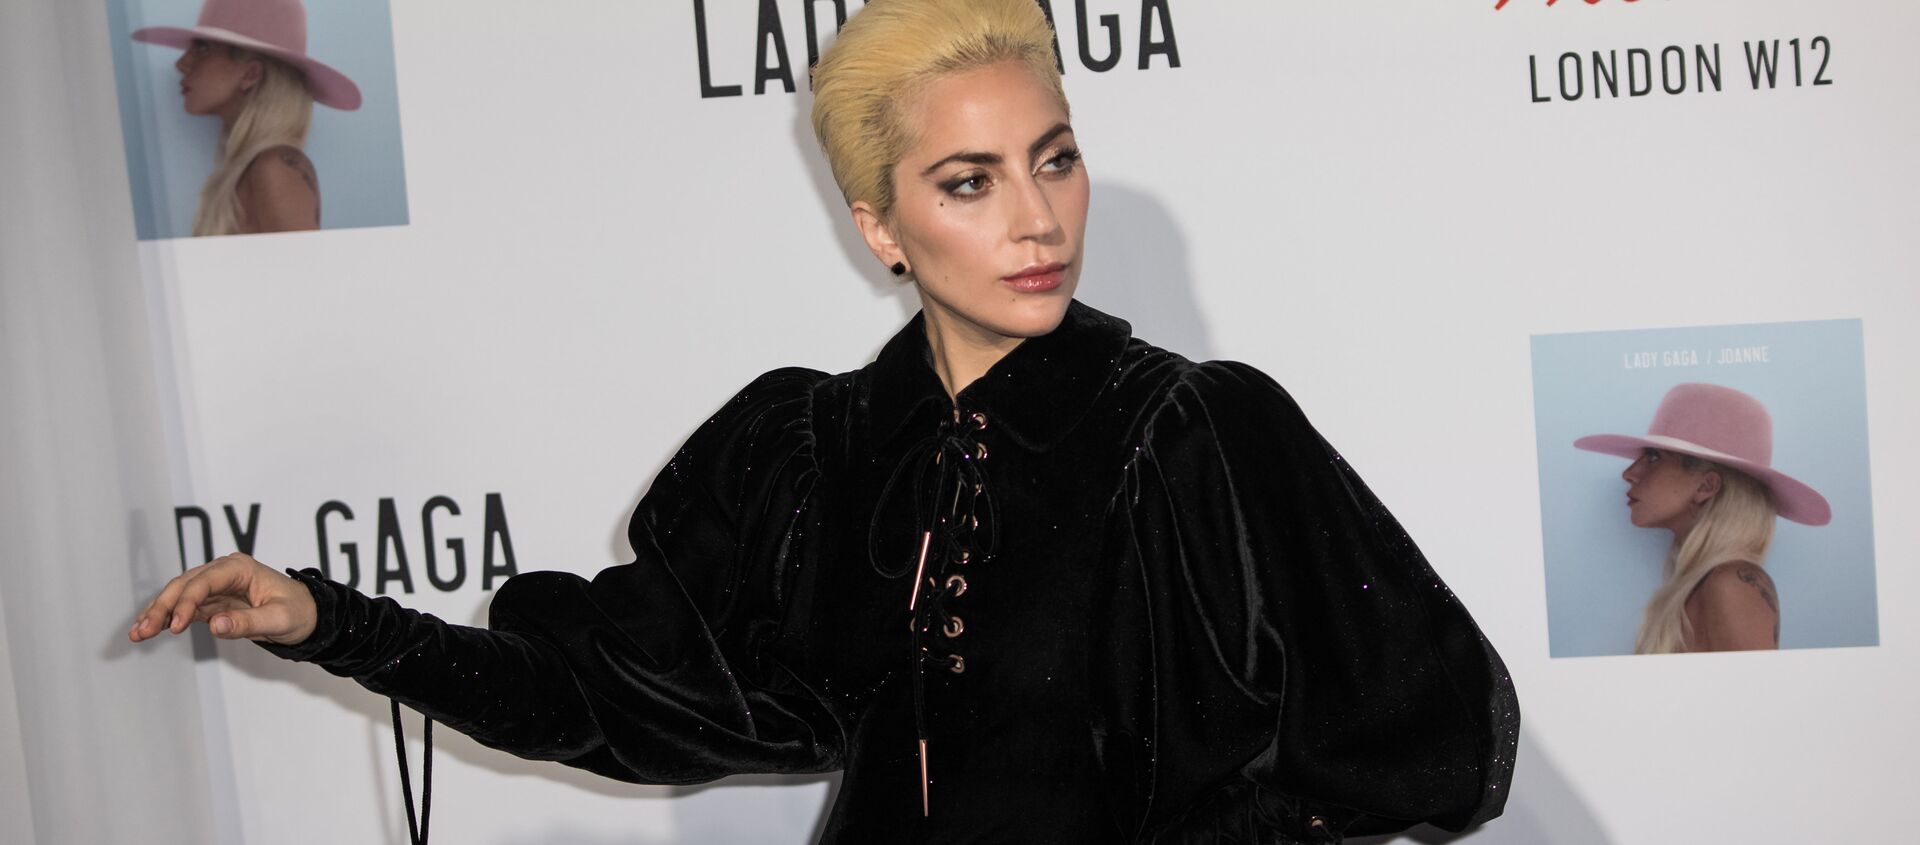 Singer Lady Gaga poses for photographers during a photo call before her surprise acoustic performance in London, Thursday, Dec. 1, 2016. - Sputnik International, 1920, 21.05.2021